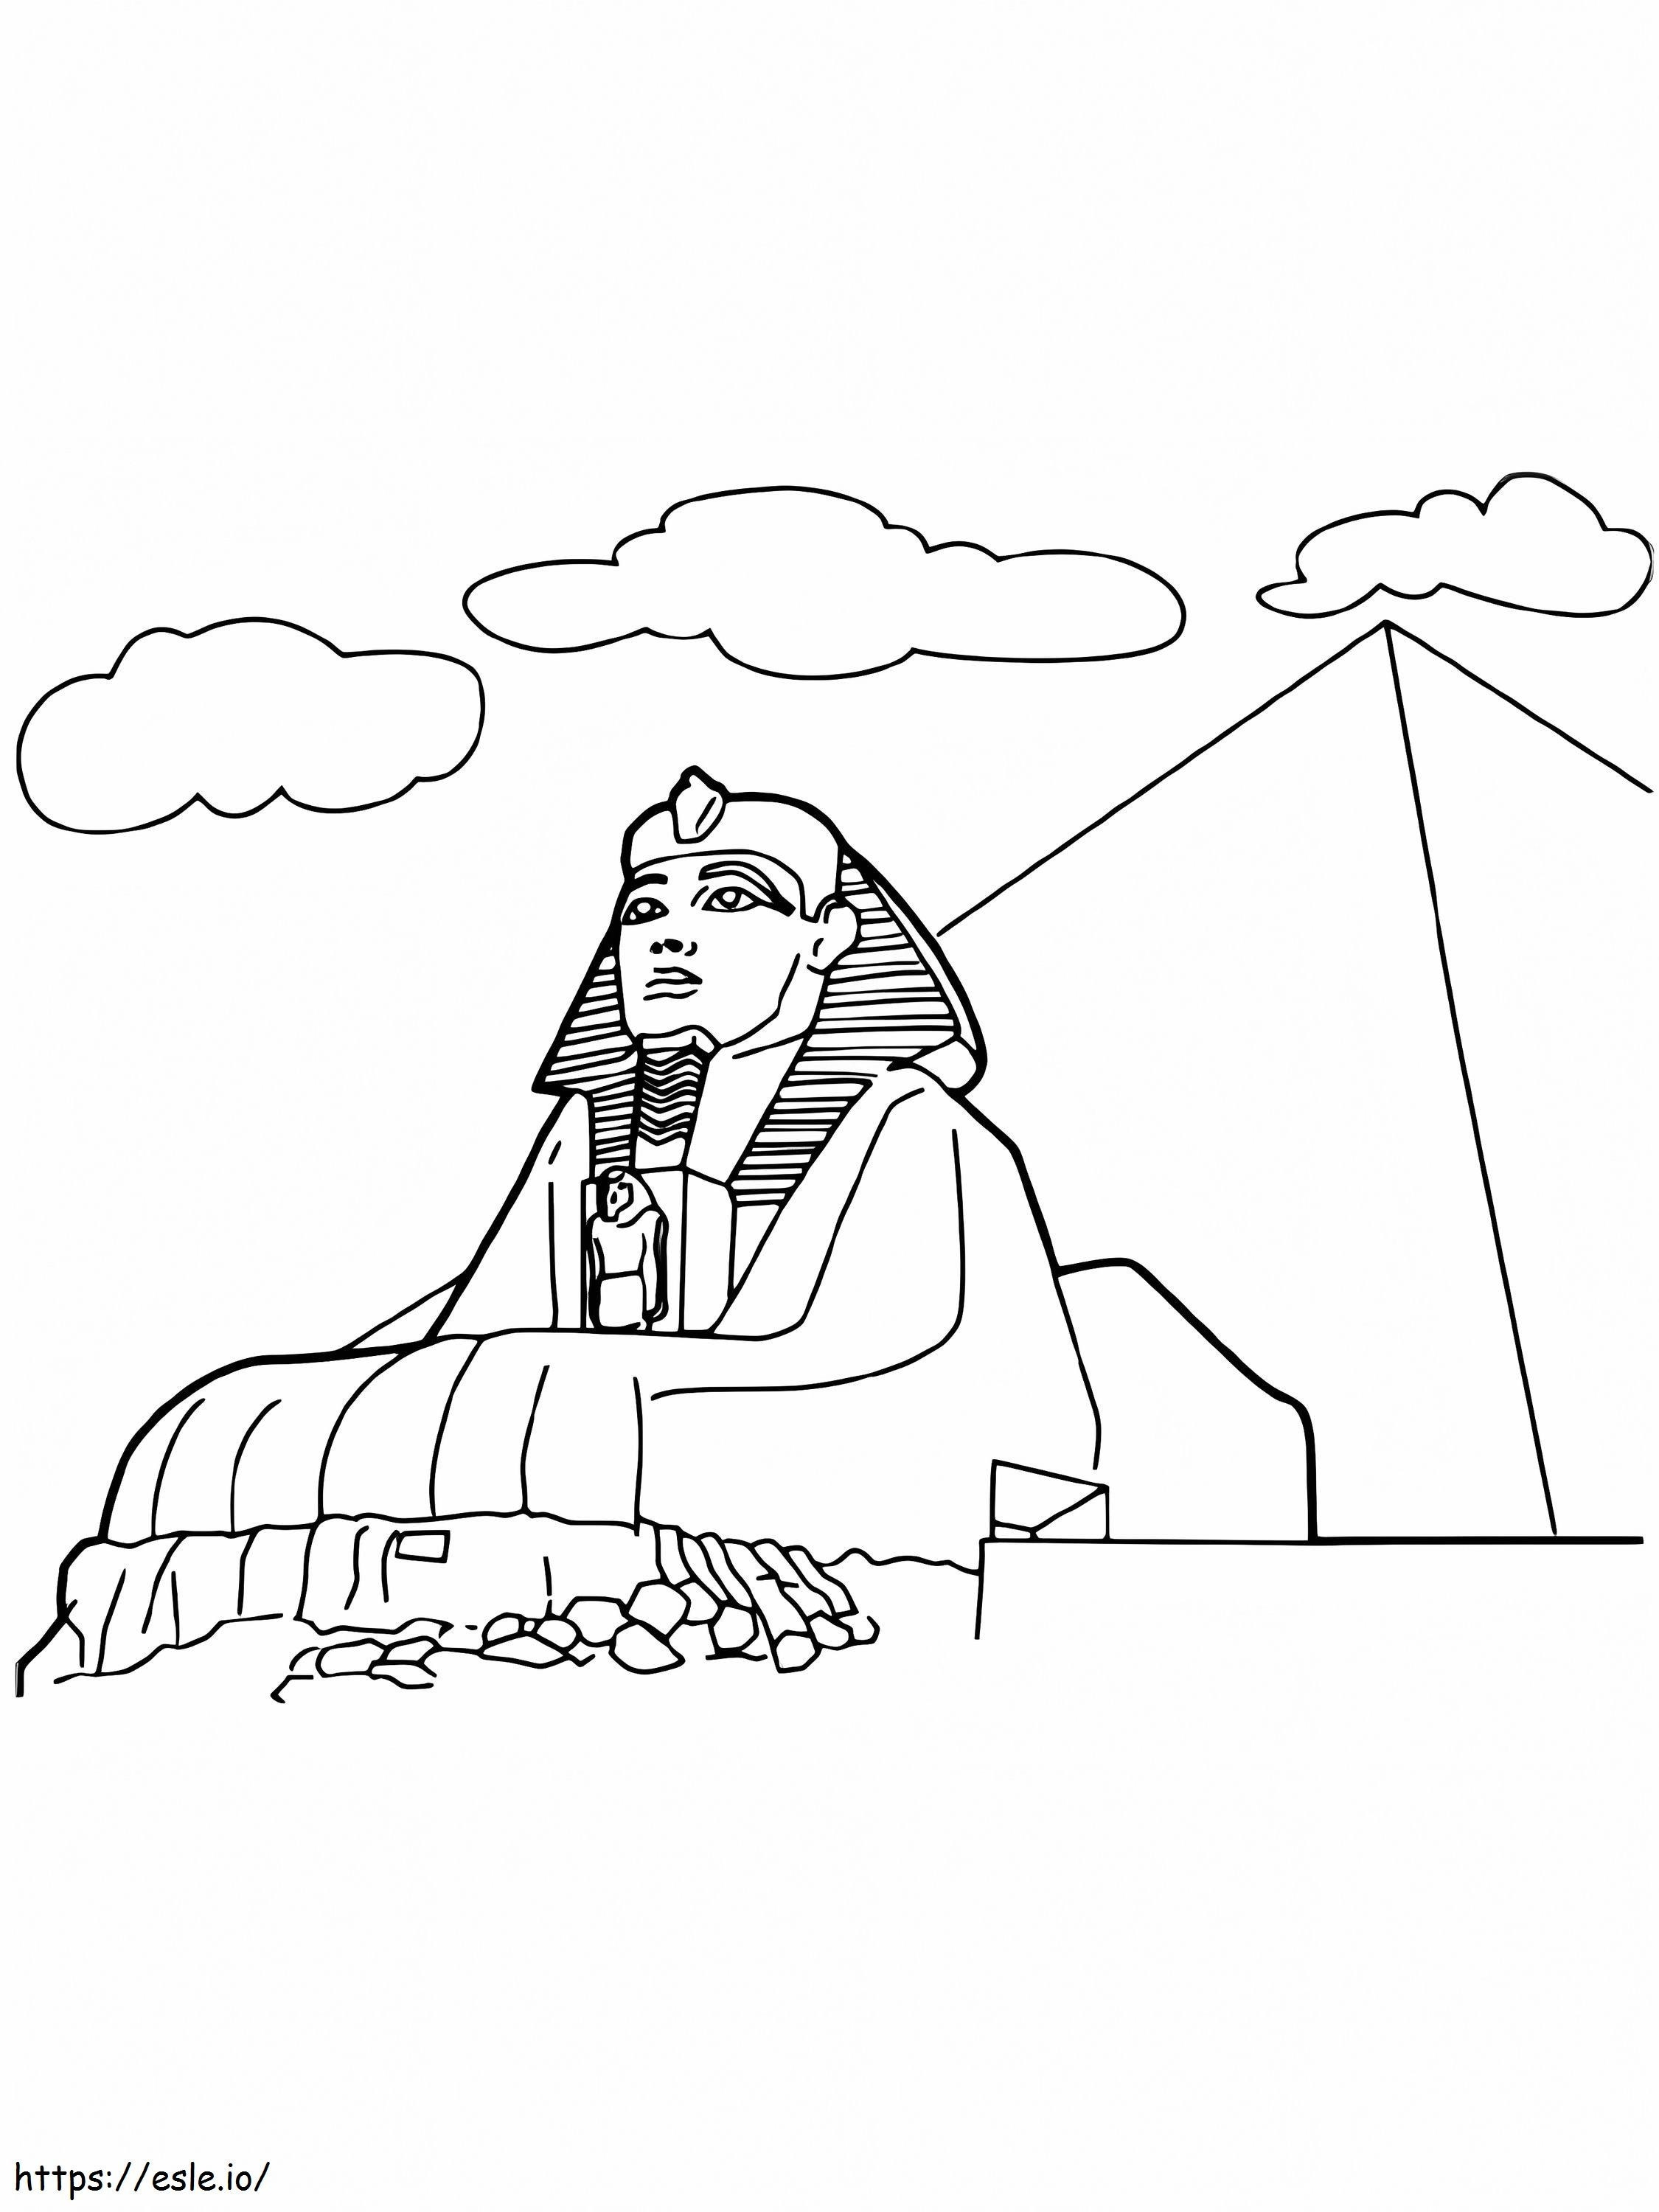 Sphinx With Pyramid coloring page